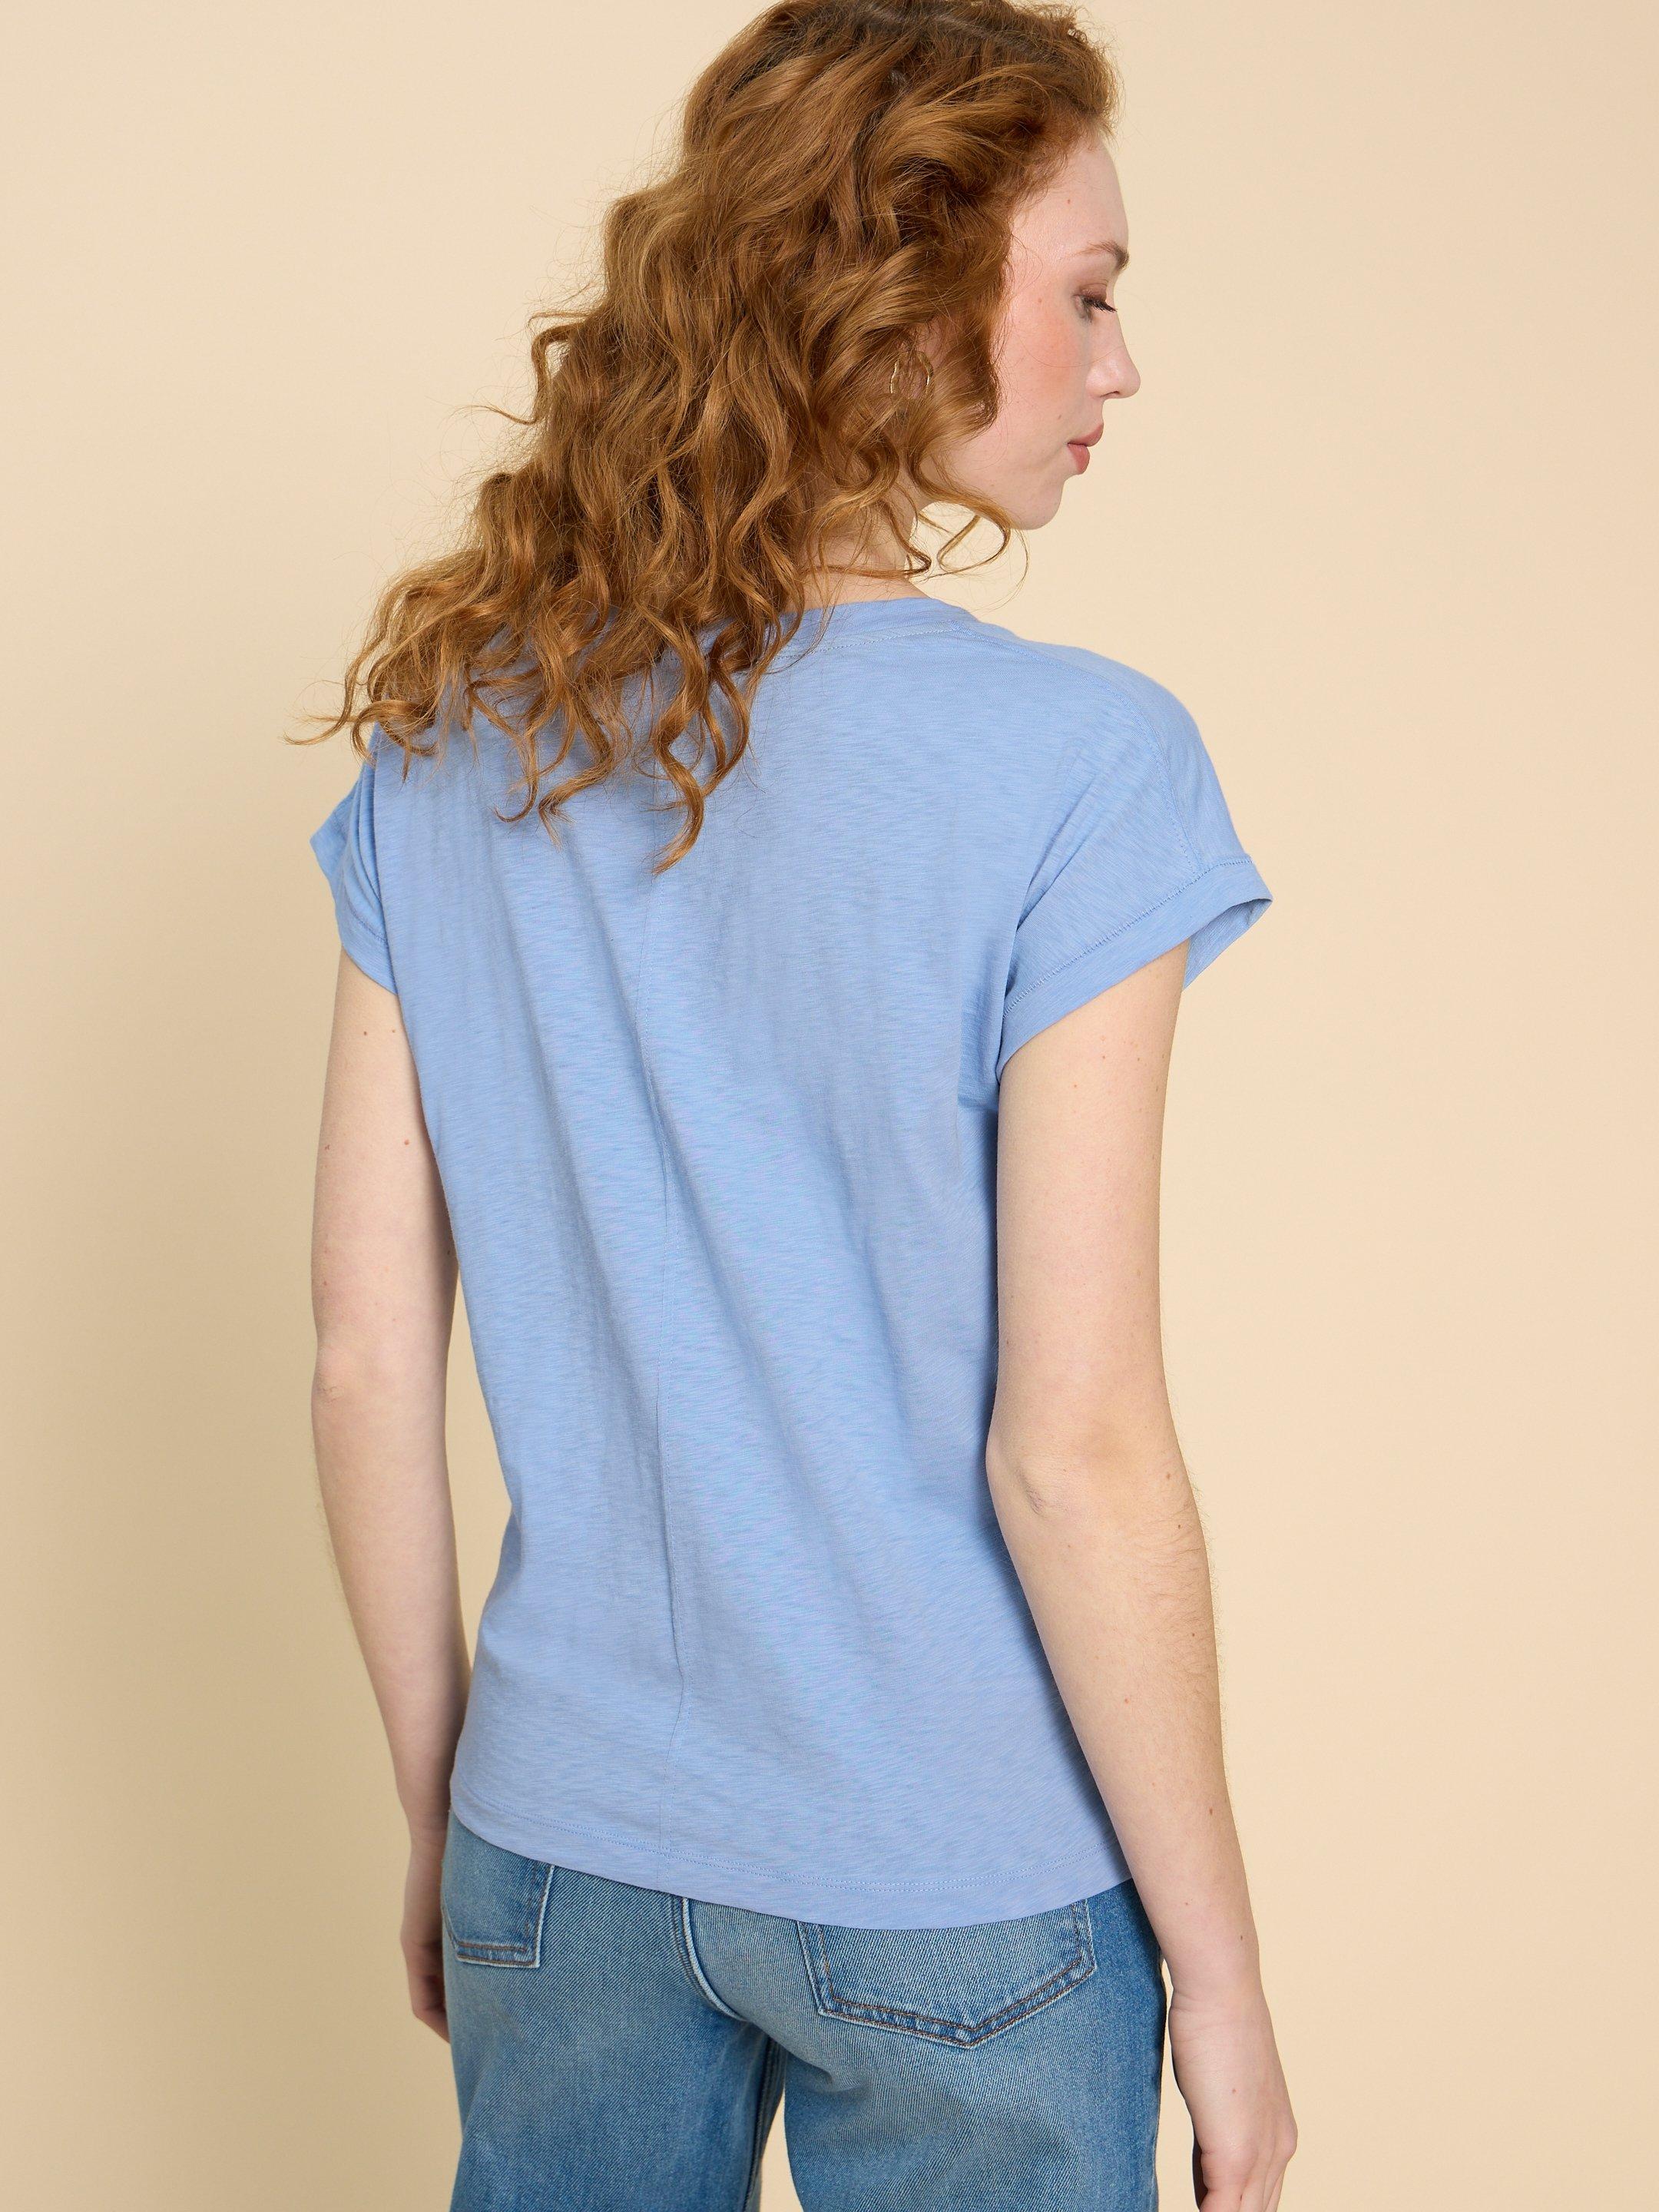 NELLY NOTCH NECK COTTON TEE in LGT BLUE - MODEL BACK